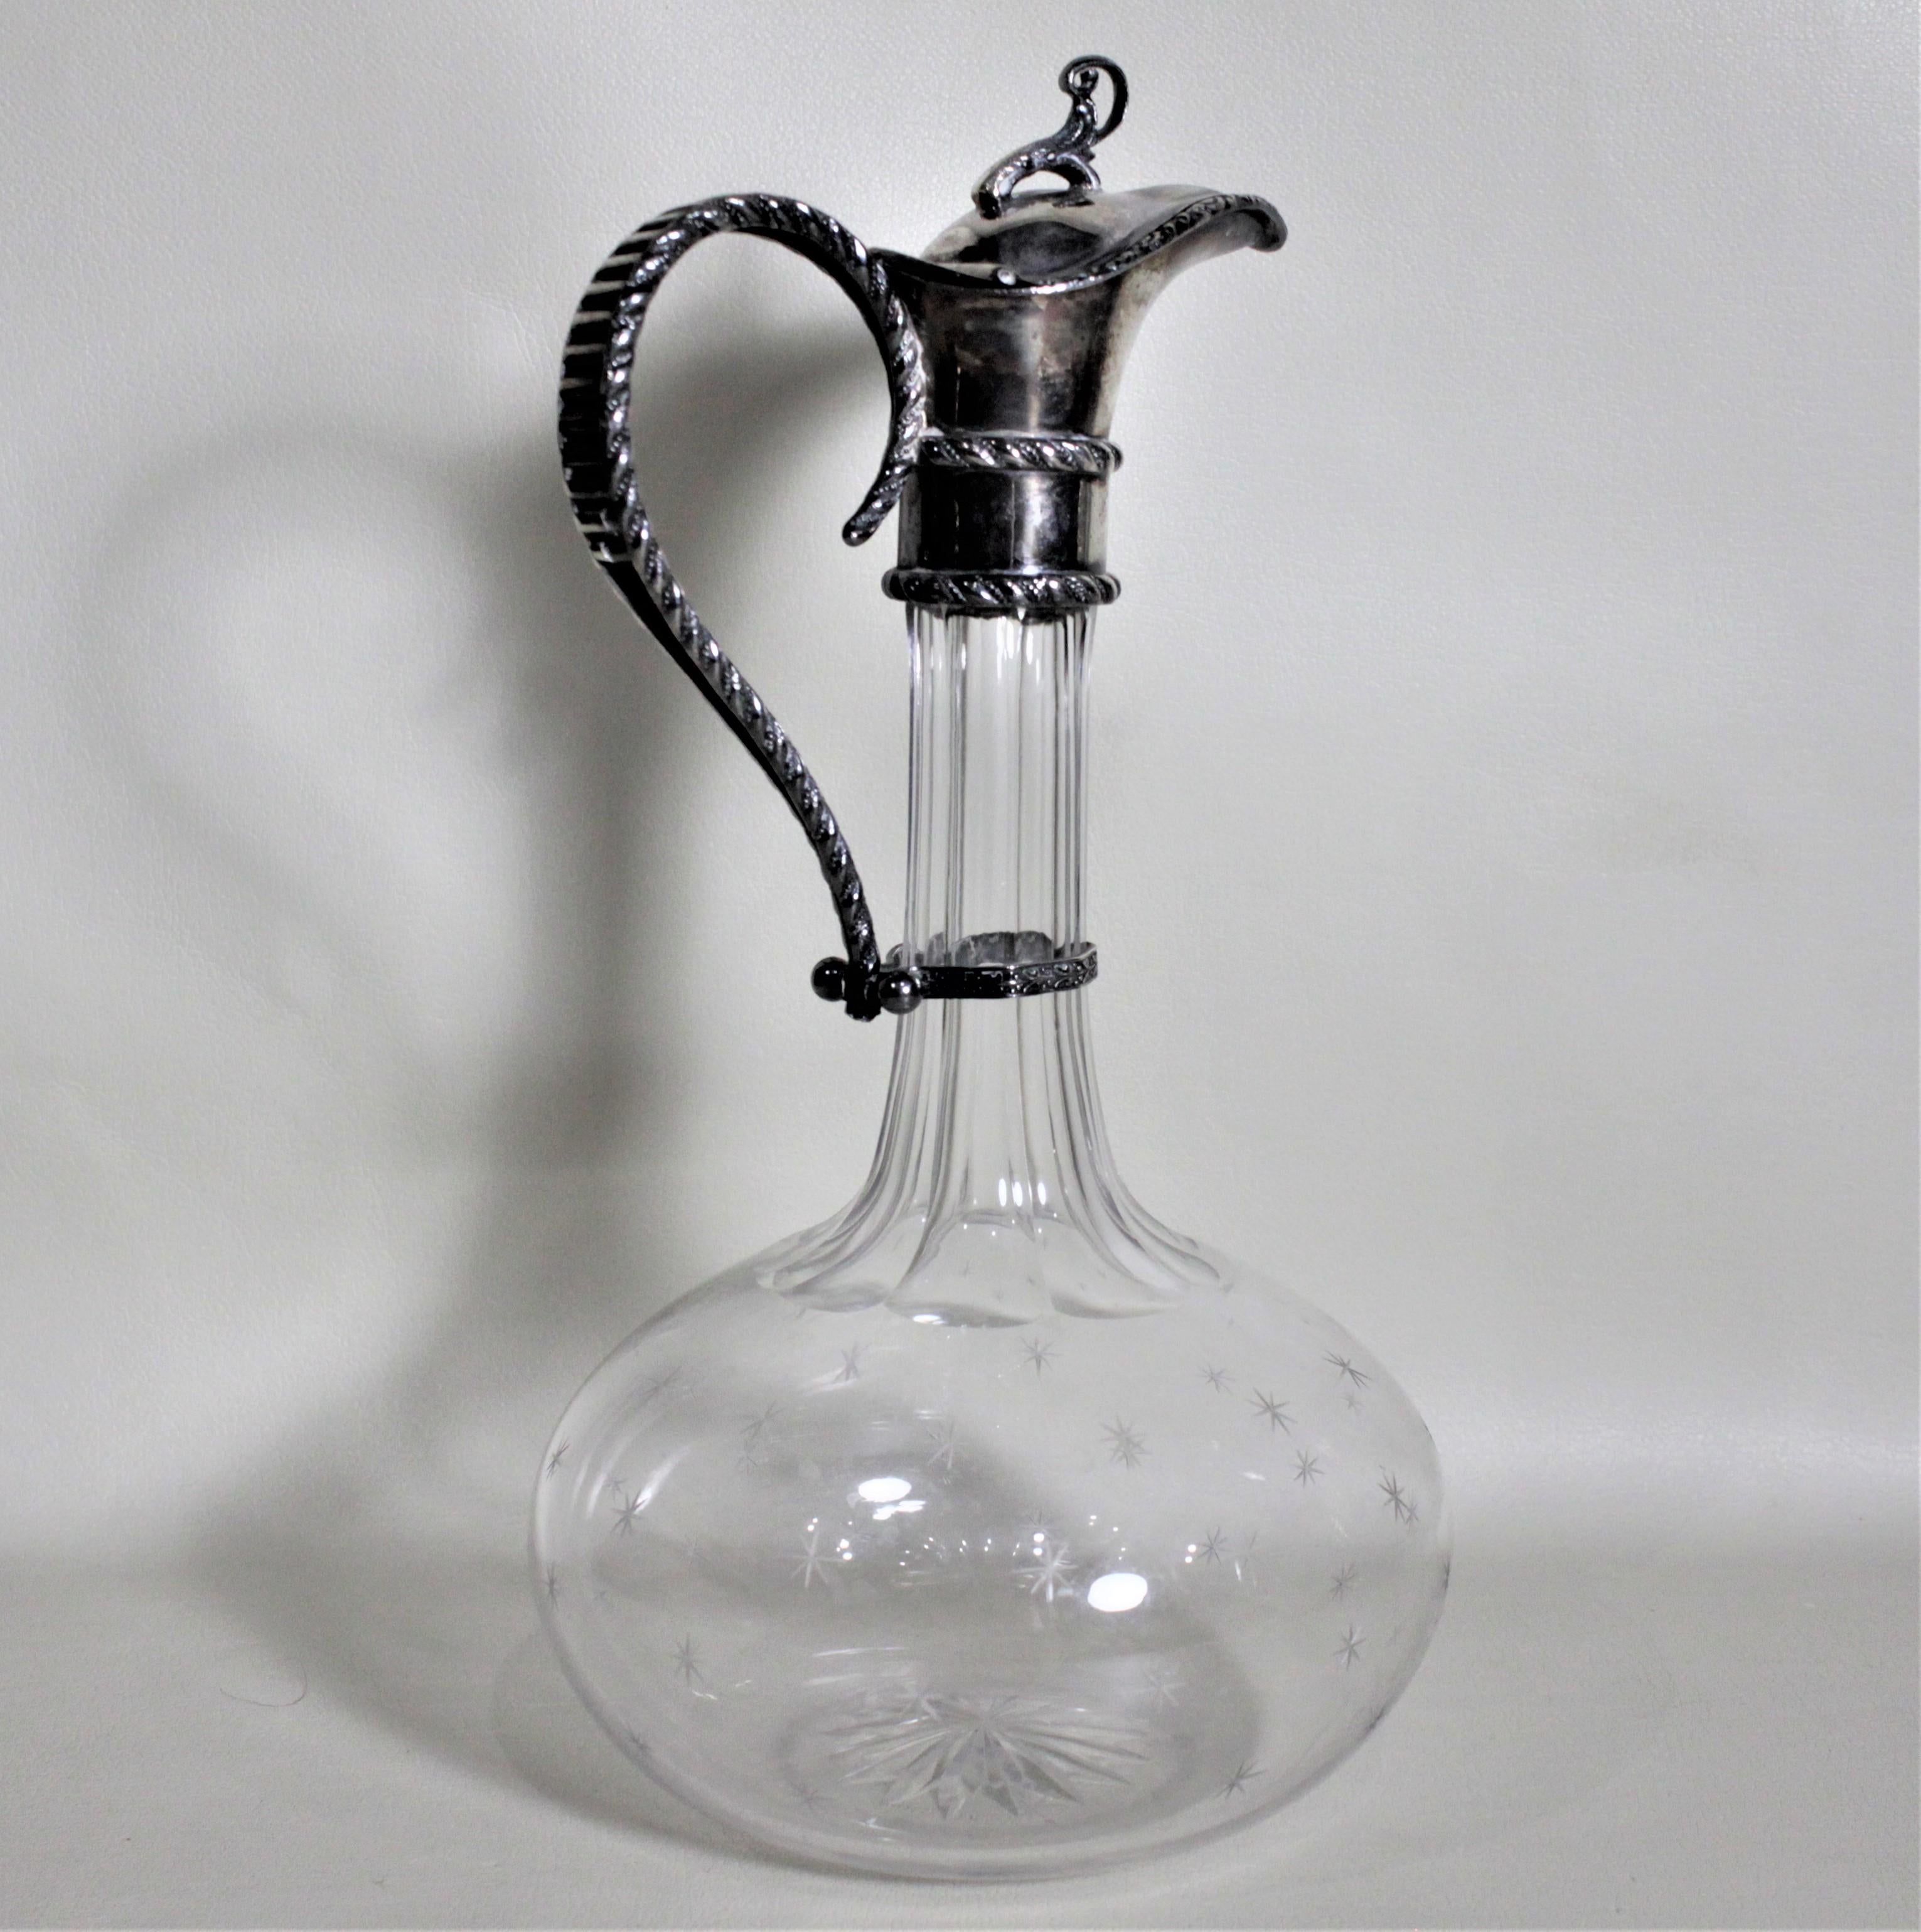 This antique silver plate and cut glass claret jug was most likely made in England in circa 1900 in the Victorian style. The jug features a simple looped finial on the cover of the deeply turned spout and a rope or raised garland motif around the